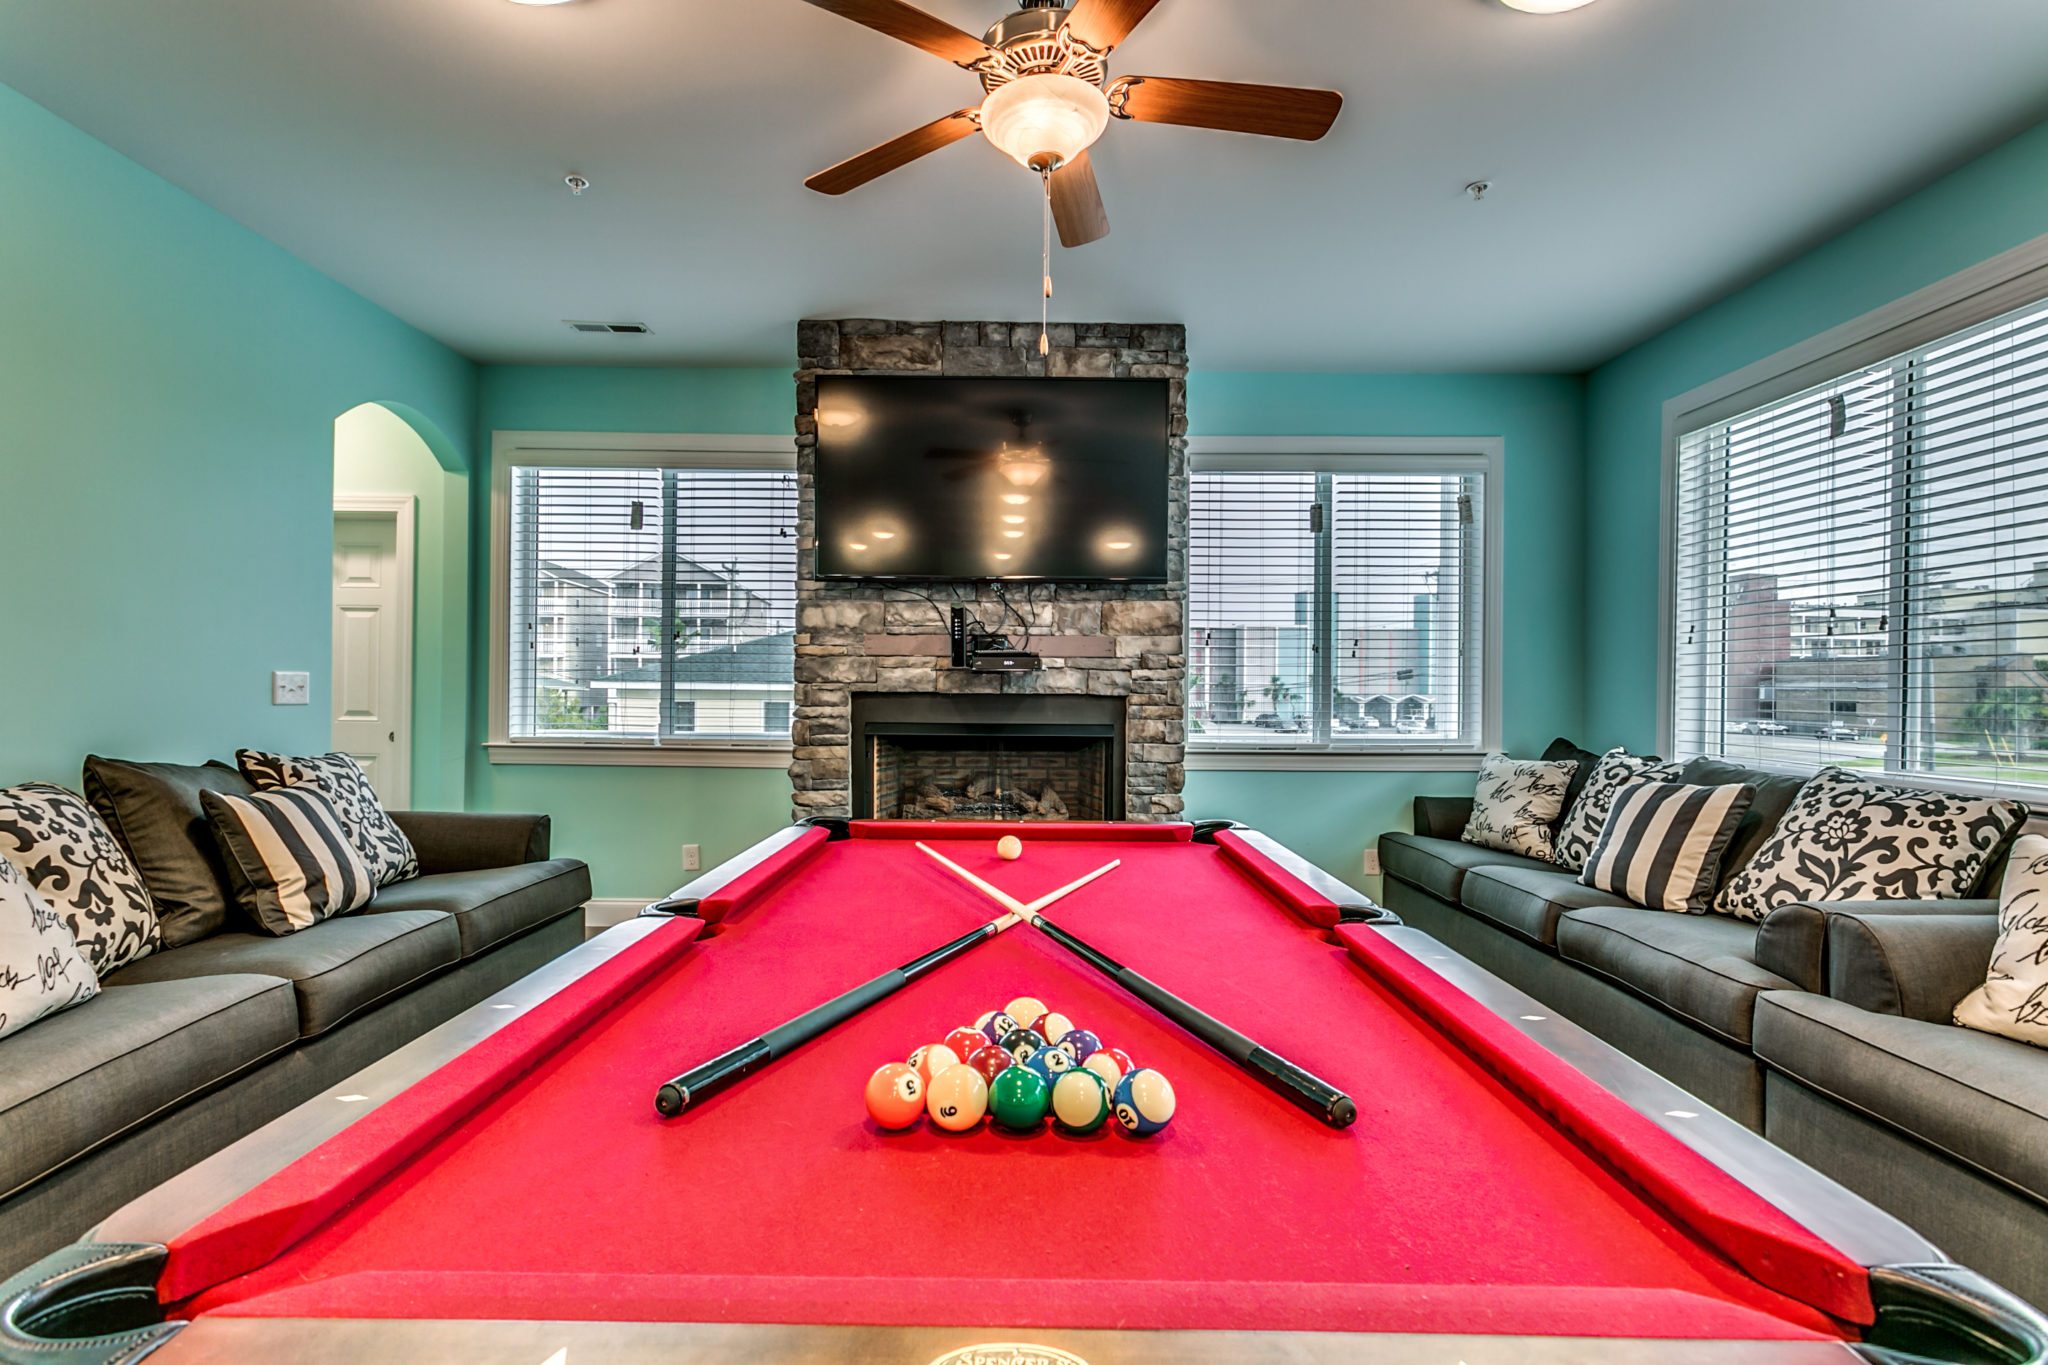 225 20th Ave game room with pool table.